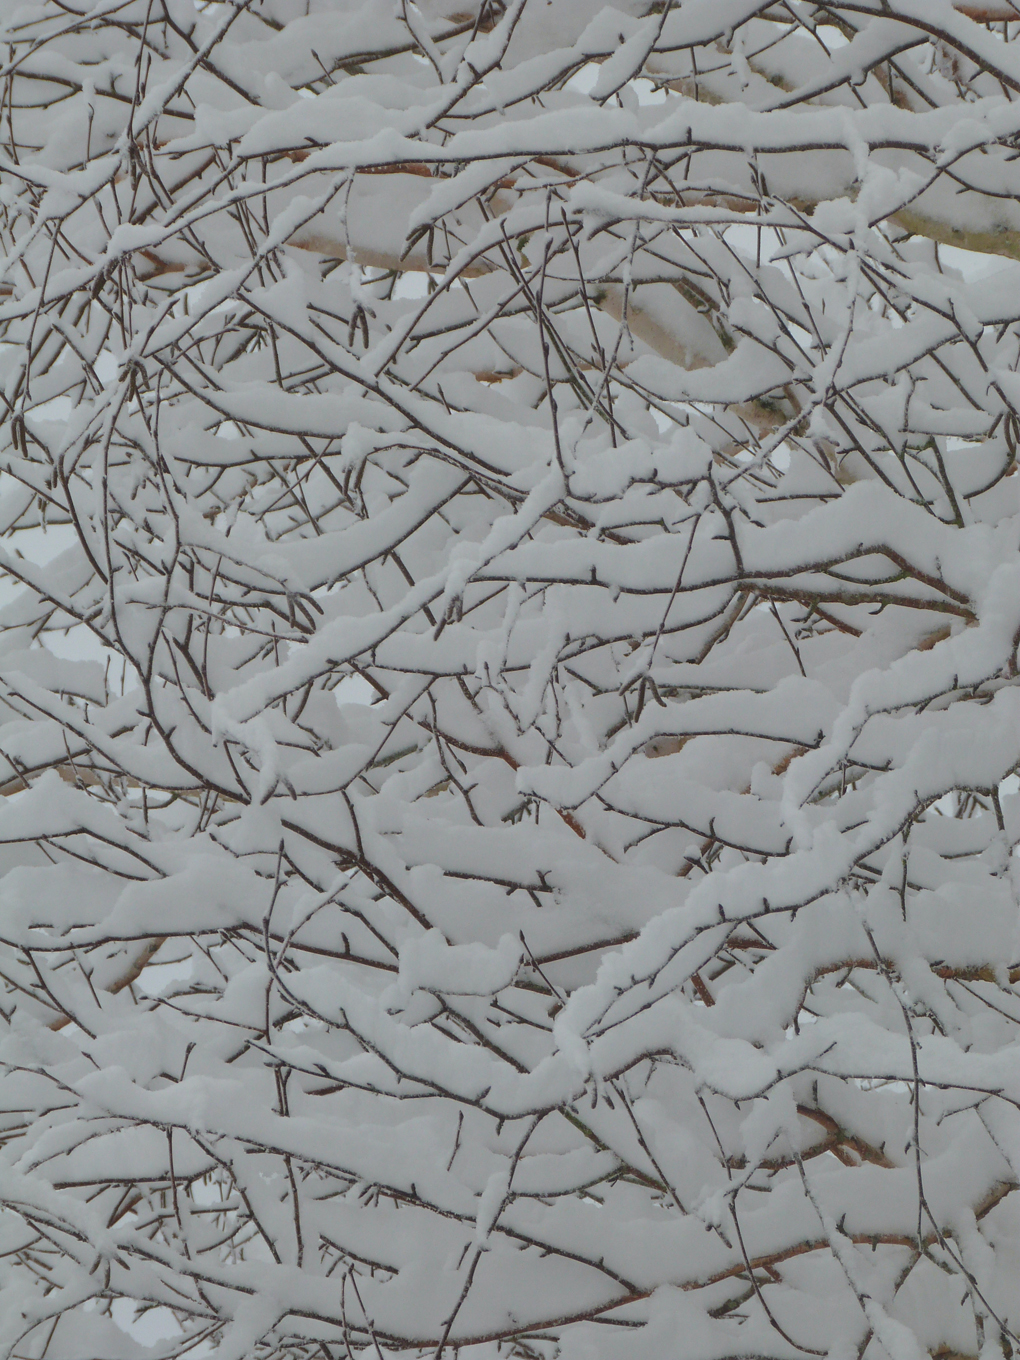 The snow fell so gently that it covered every twig and branch, turning this birch tree into a snow maze.